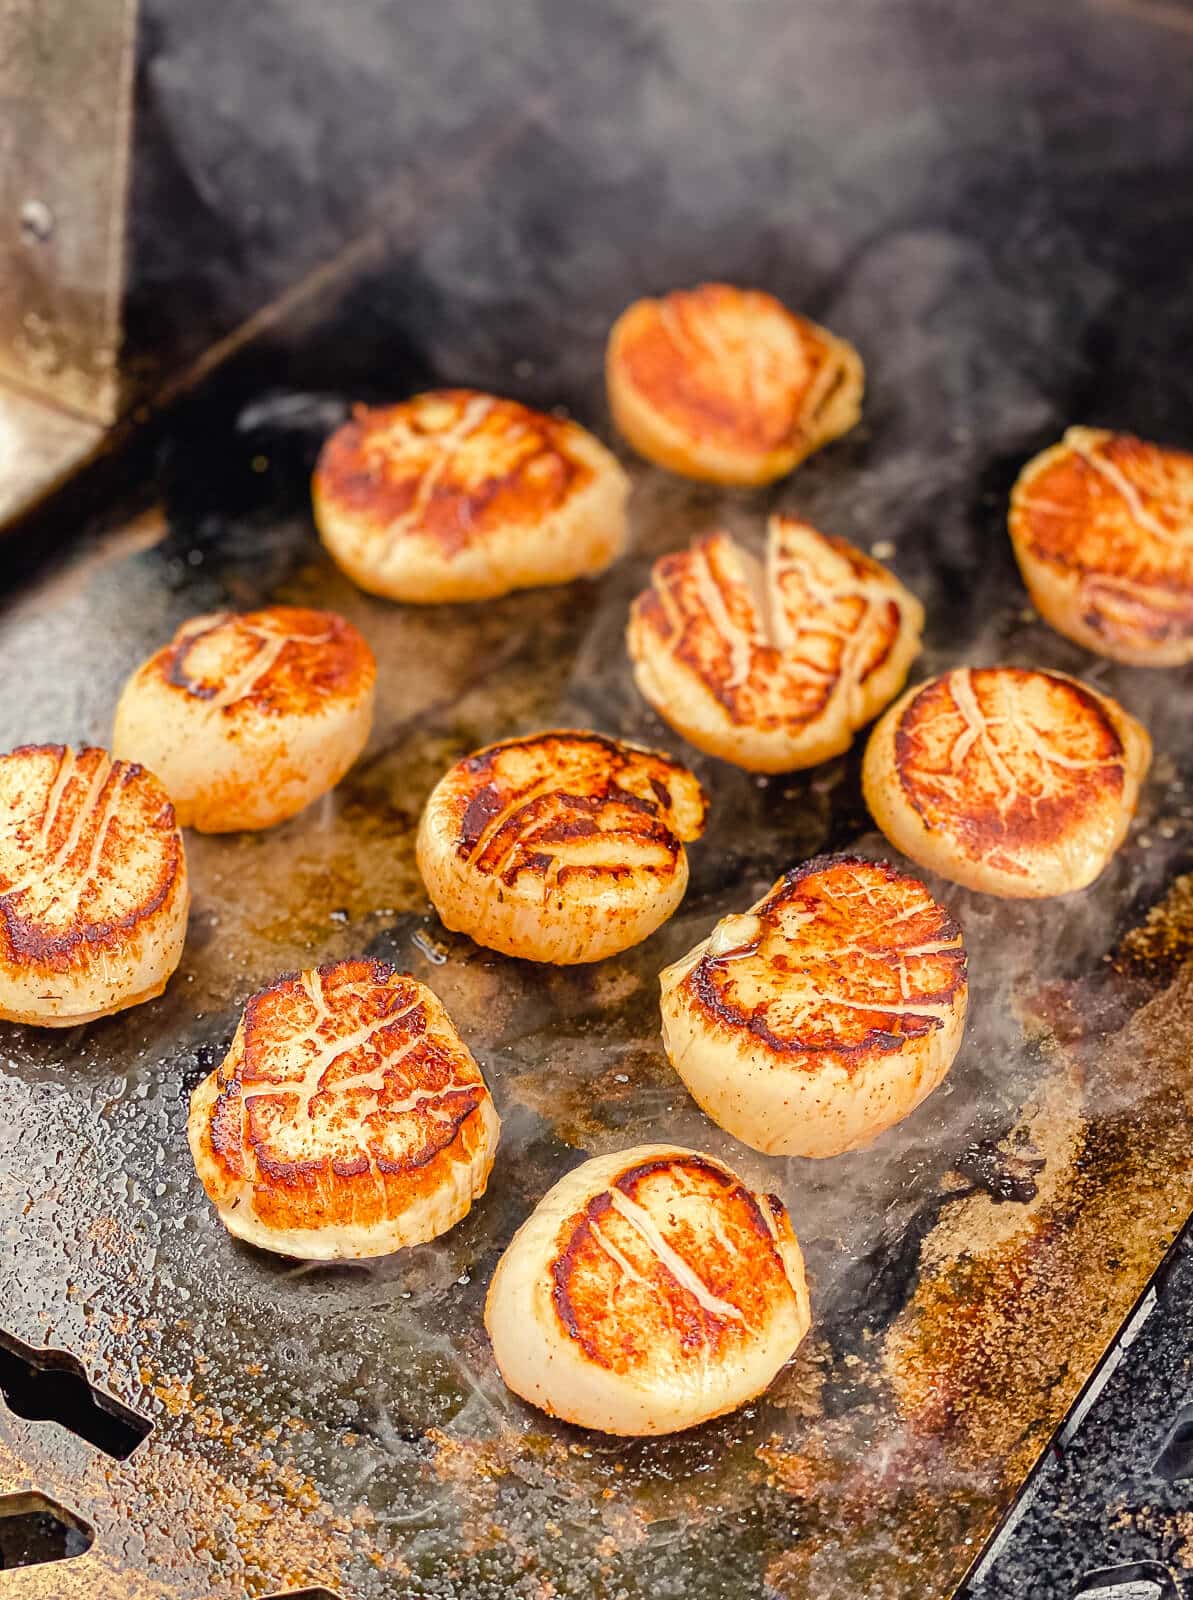 searing scallops on a griddle surface